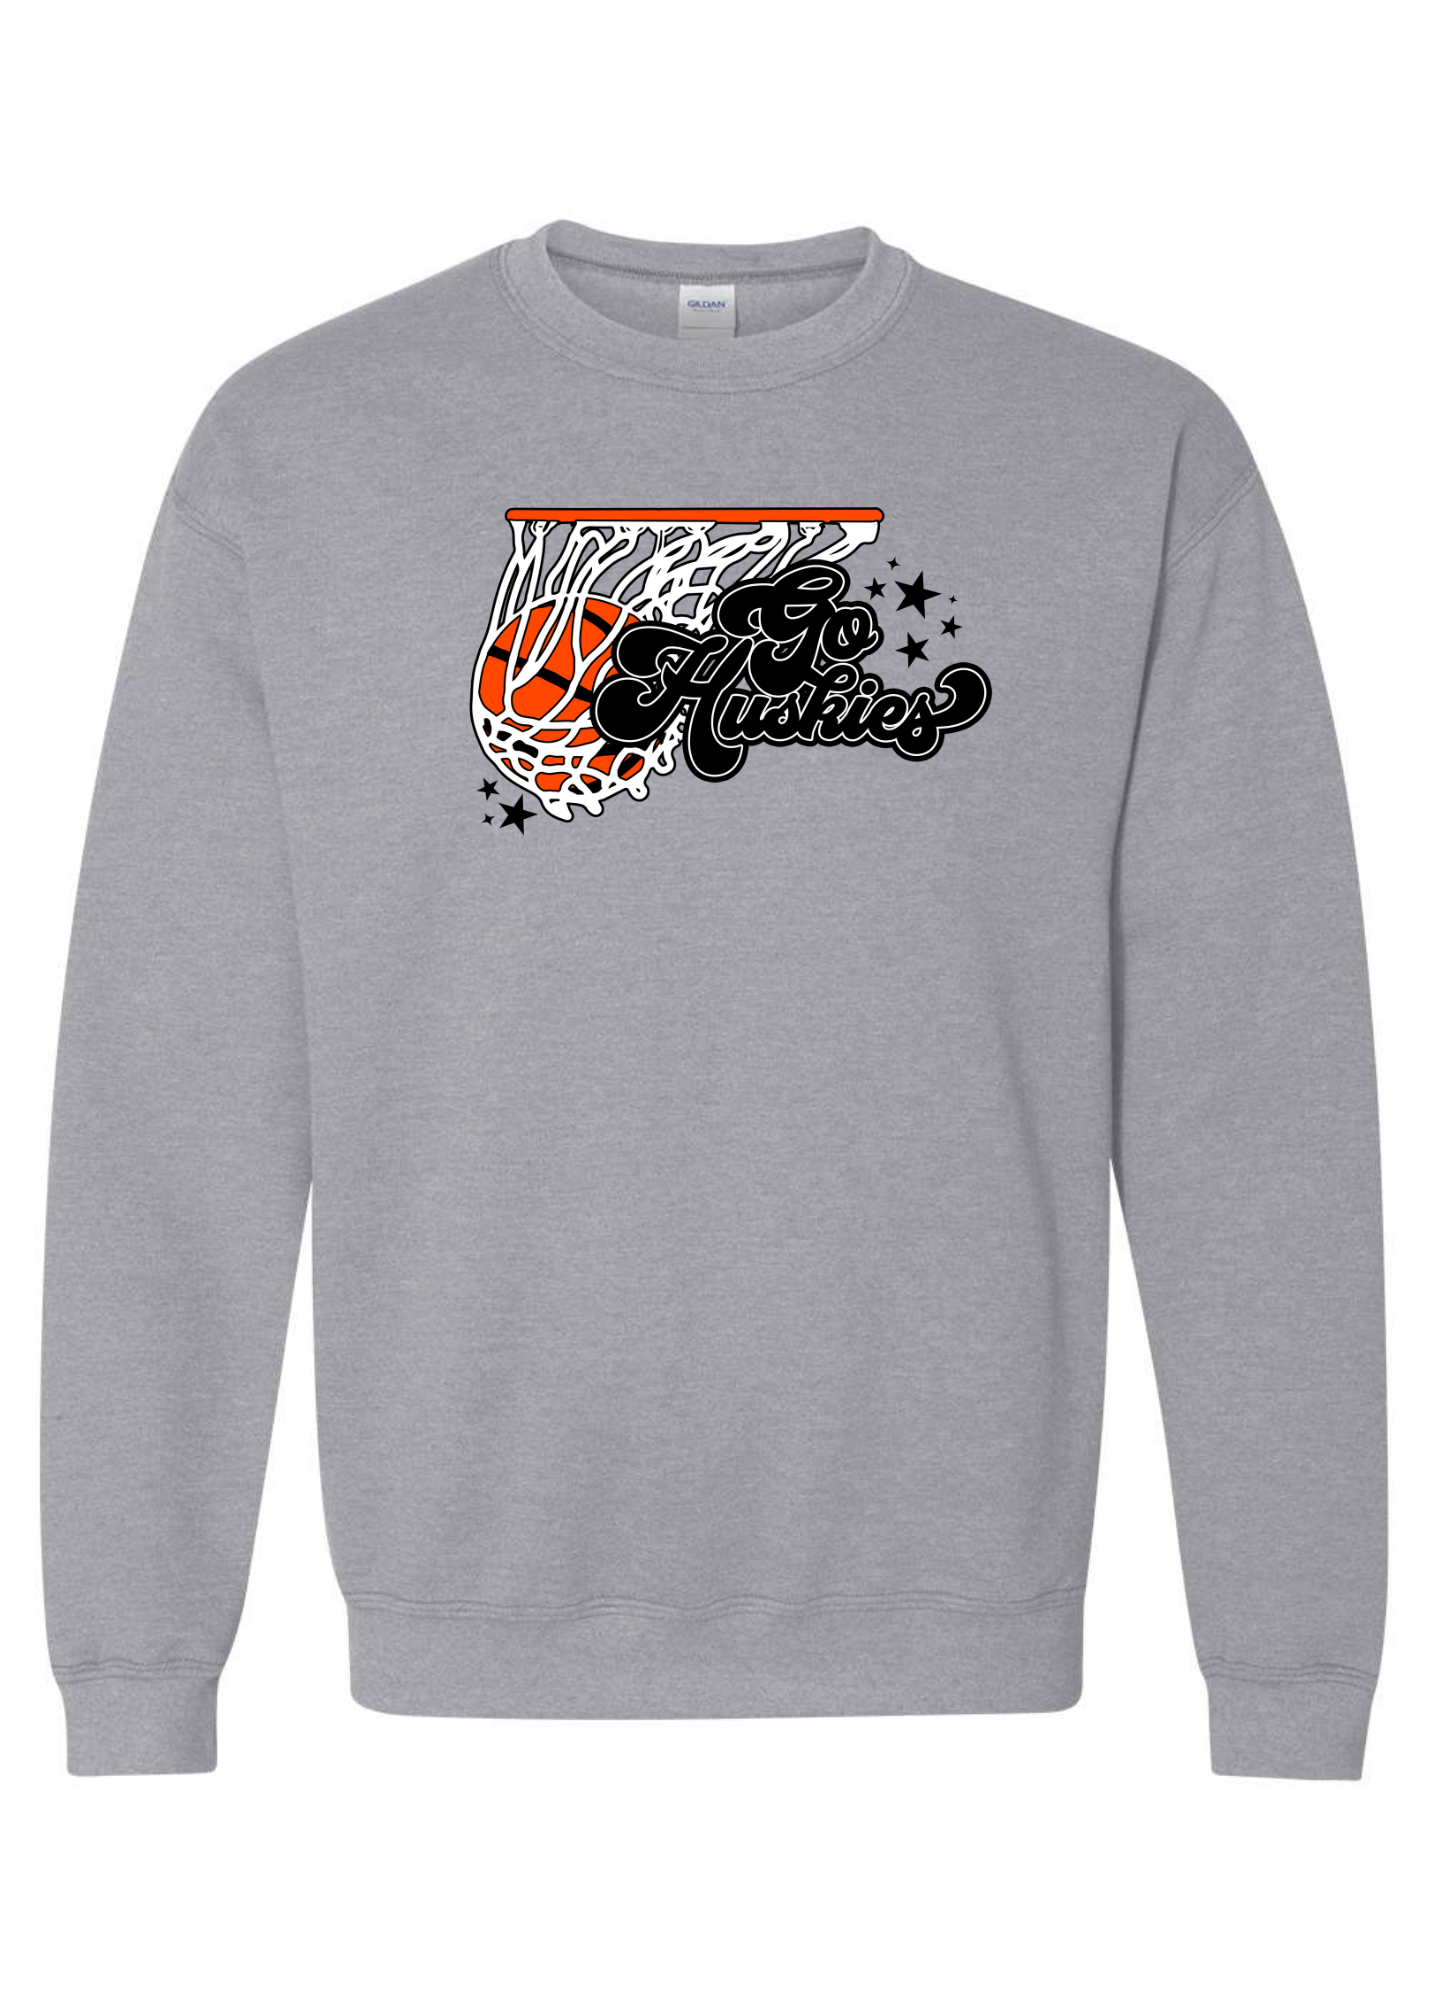 Go Huskies Basketball | Adult Pullover-Adult Crewneck-Sister Shirts-Sister Shirts, Cute & Custom Tees for Mama & Littles in Trussville, Alabama.